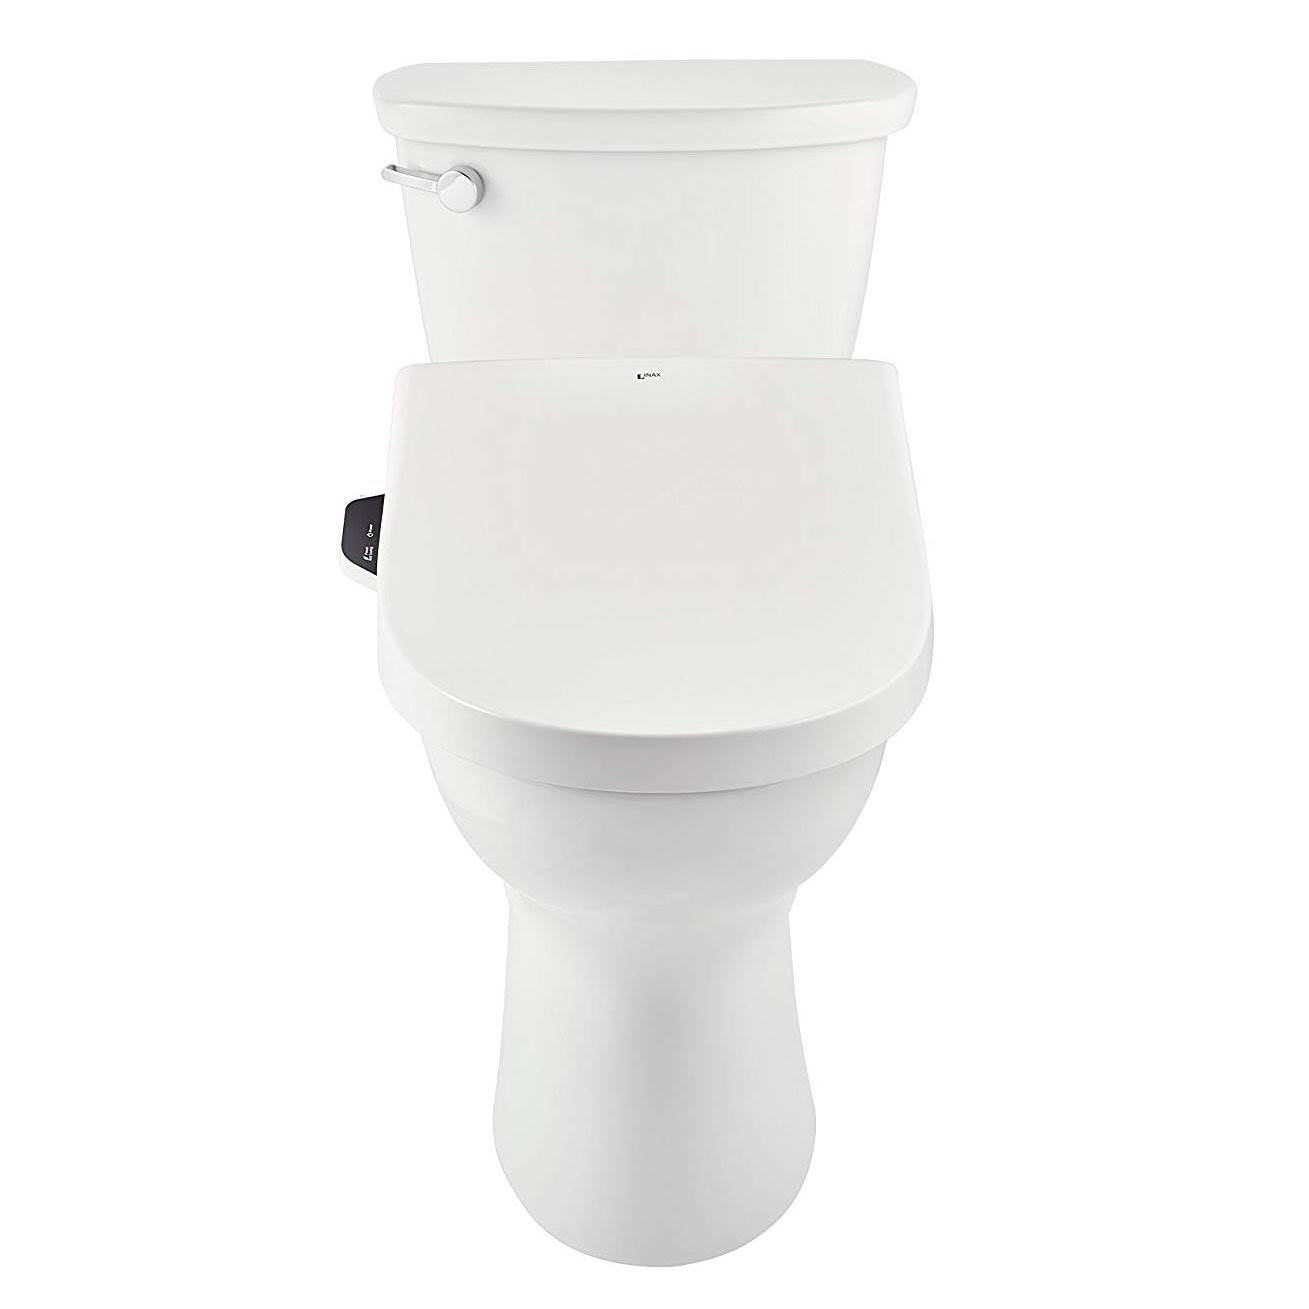 American Standard INAX 415 Heated Dual Nozzle Shower Bidet Toilet Seat w/ Remote - image 2 of 6